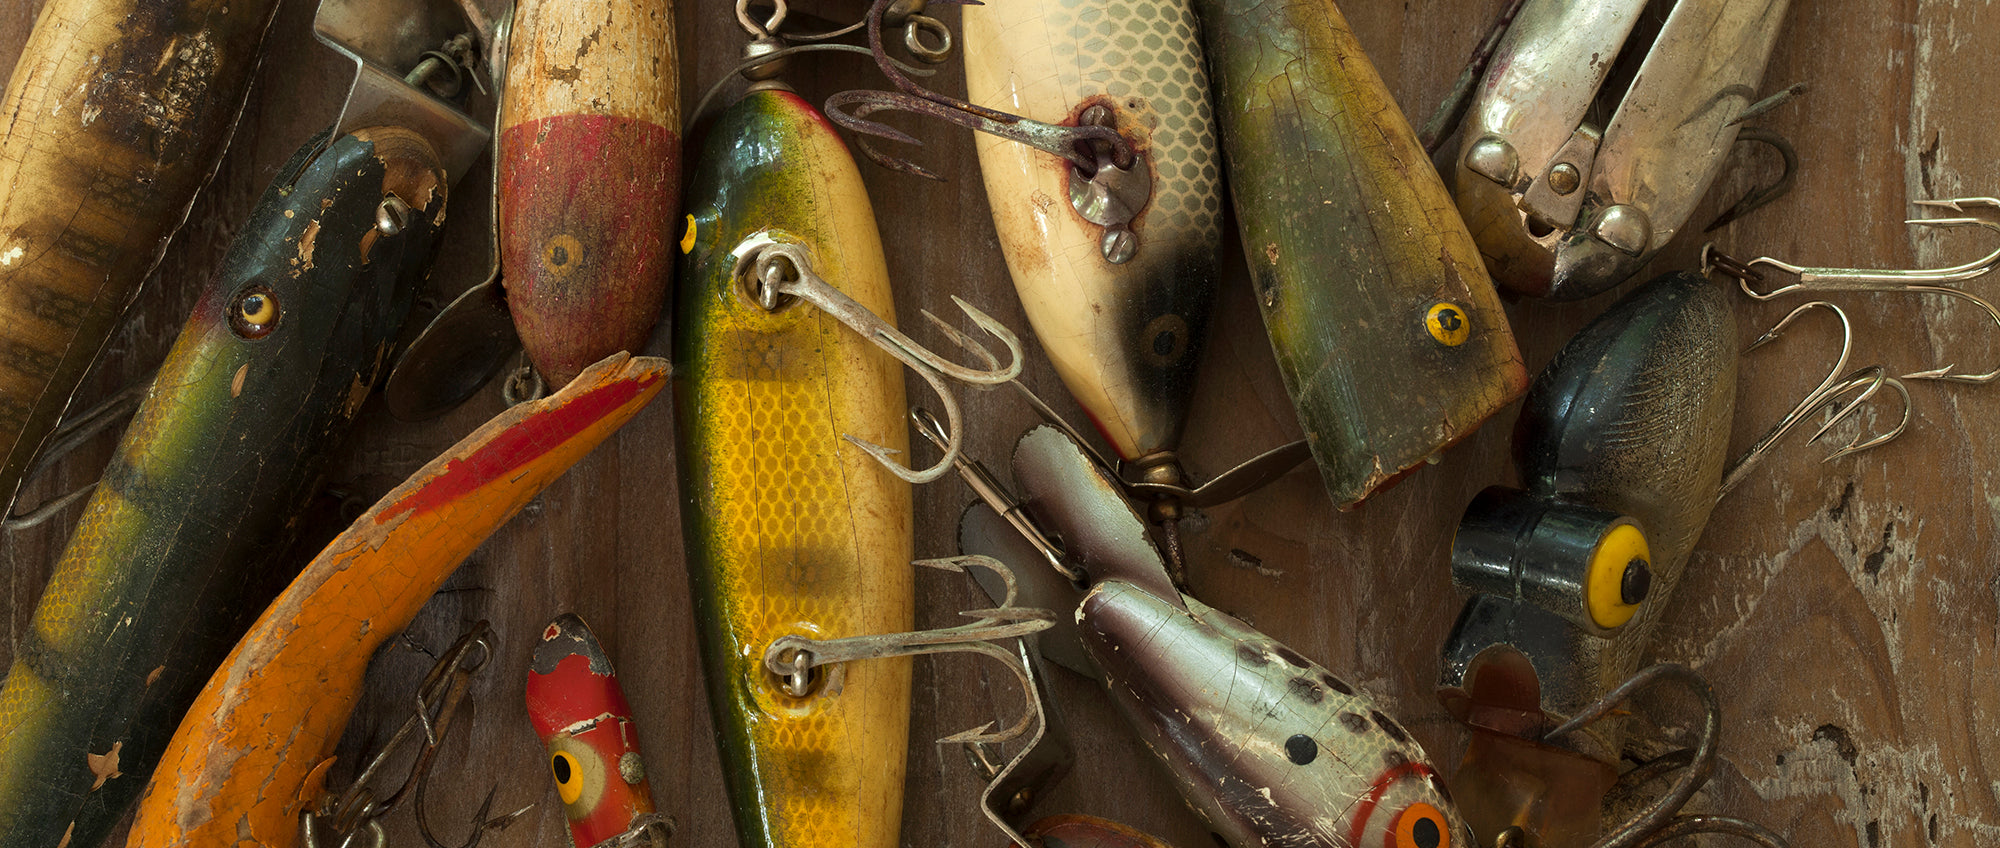 Angler by Profession, Lure Collector by Choice - Major League Fishing